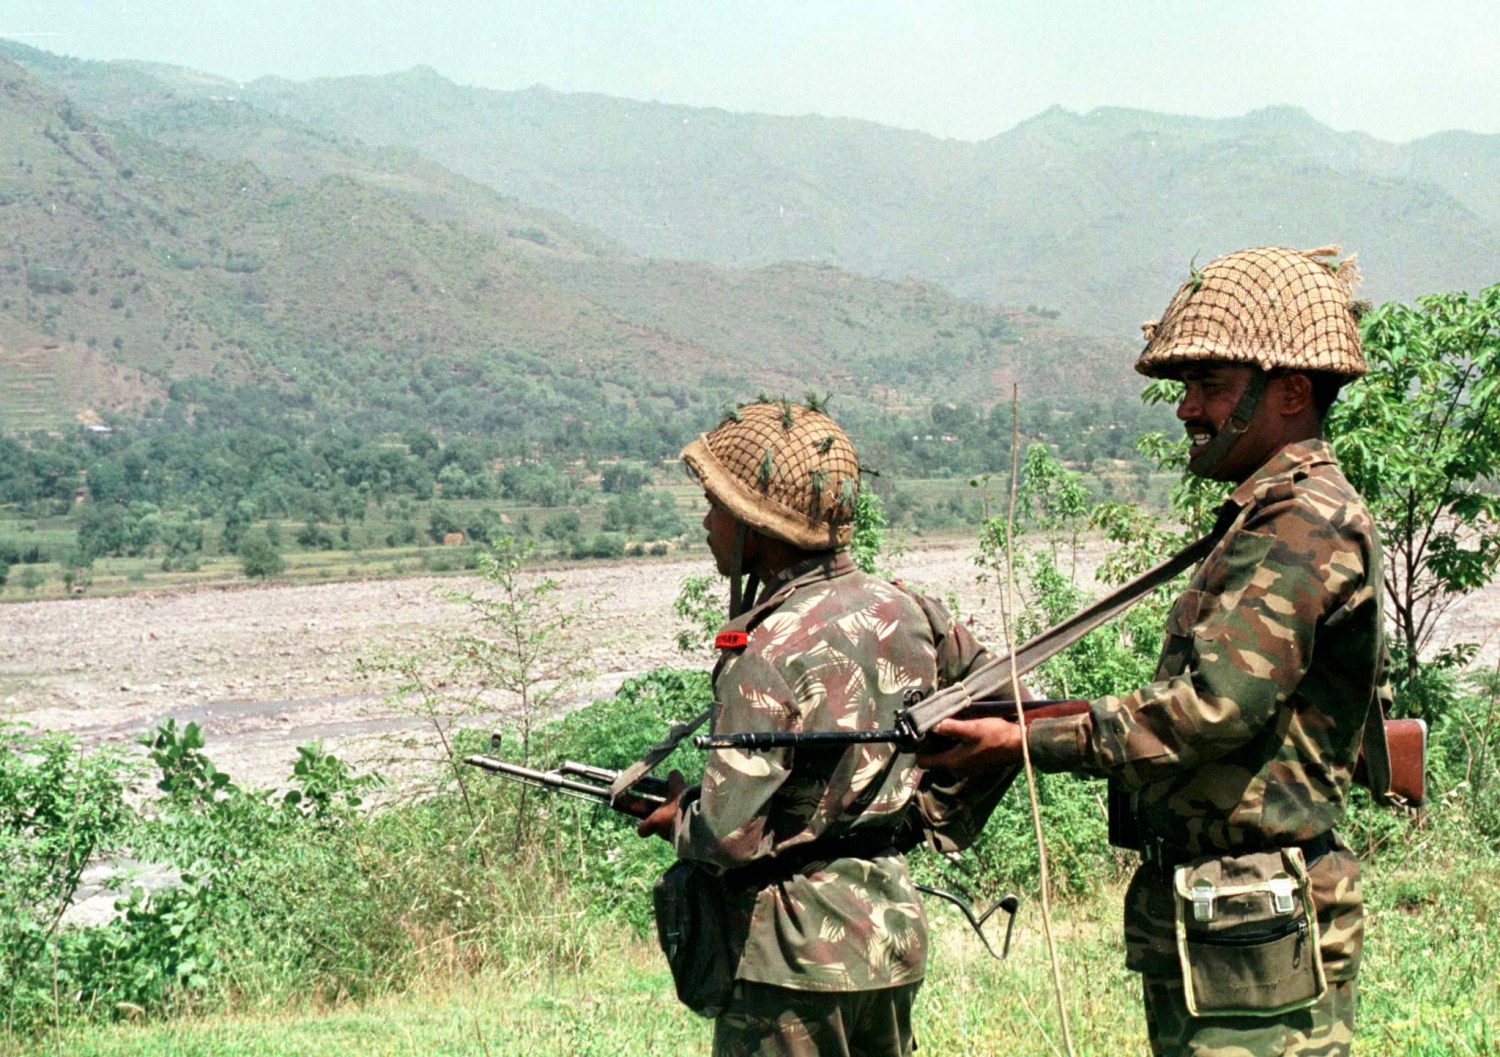 FILE PHOTO 7MAY96 - Indian soldiers keep vigil at Degwar in strife-torn Kashmir which borders Pakistan in this file photo. India on Wednesday launched air strikes on its side of a ceasefire line to expel Pakistan-backed militants who infiltrated in Kashmir's Kargil sector. It also warned Pakistan's army and airforce not to interfere.KK/CC - RP1DRIIGLPAA